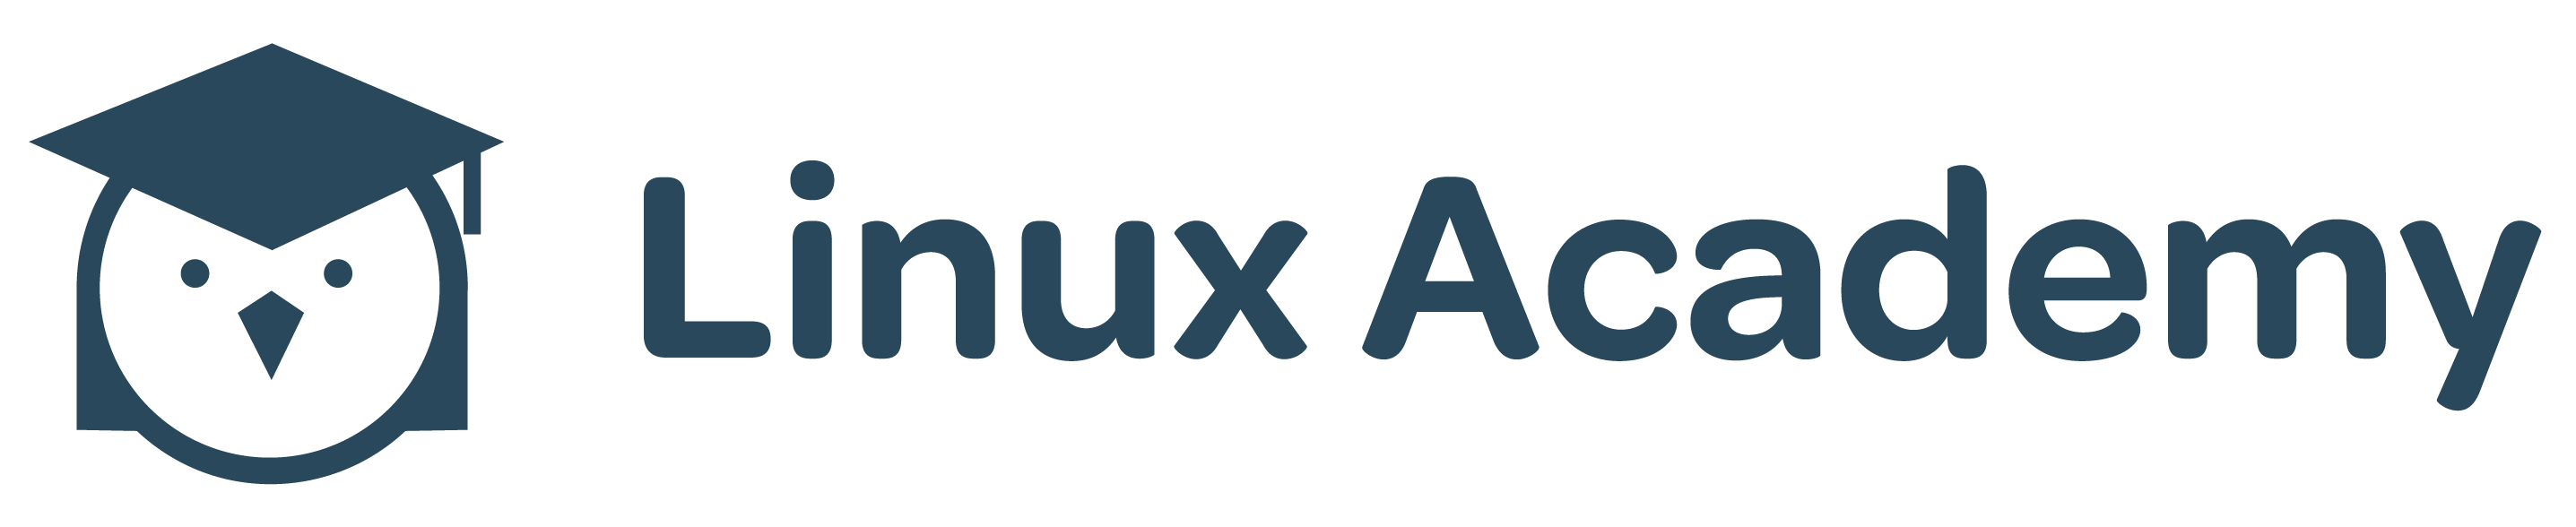 Linux Academy sign in